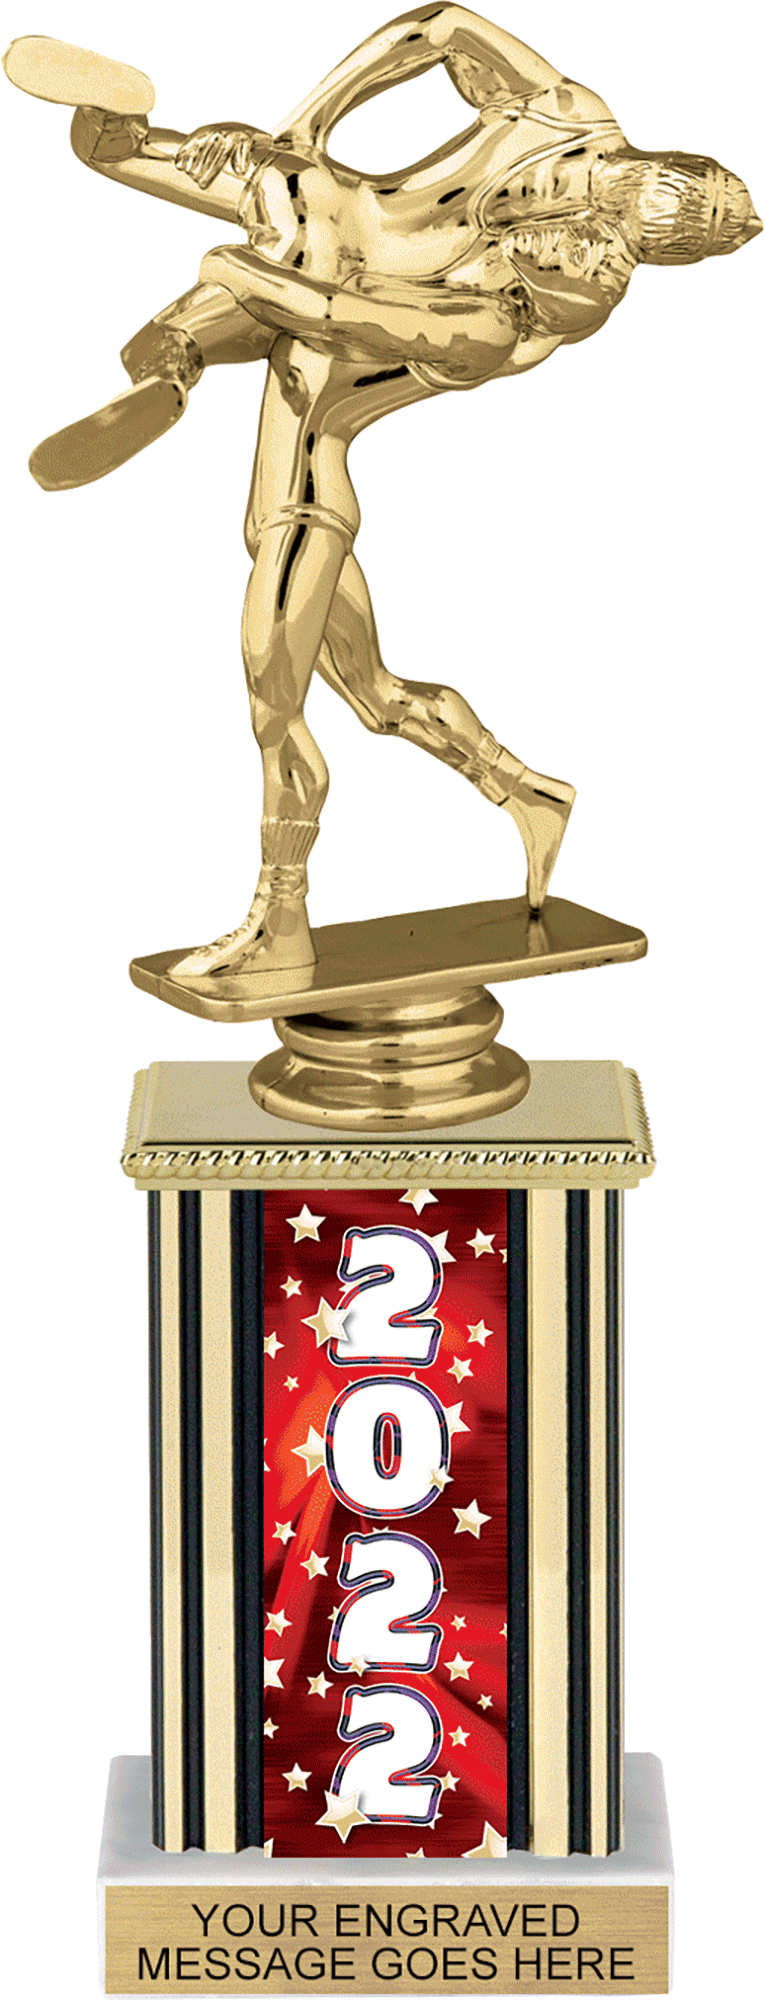 Year Glowing Stars Rectangle Column Trophy - Red 10 inch